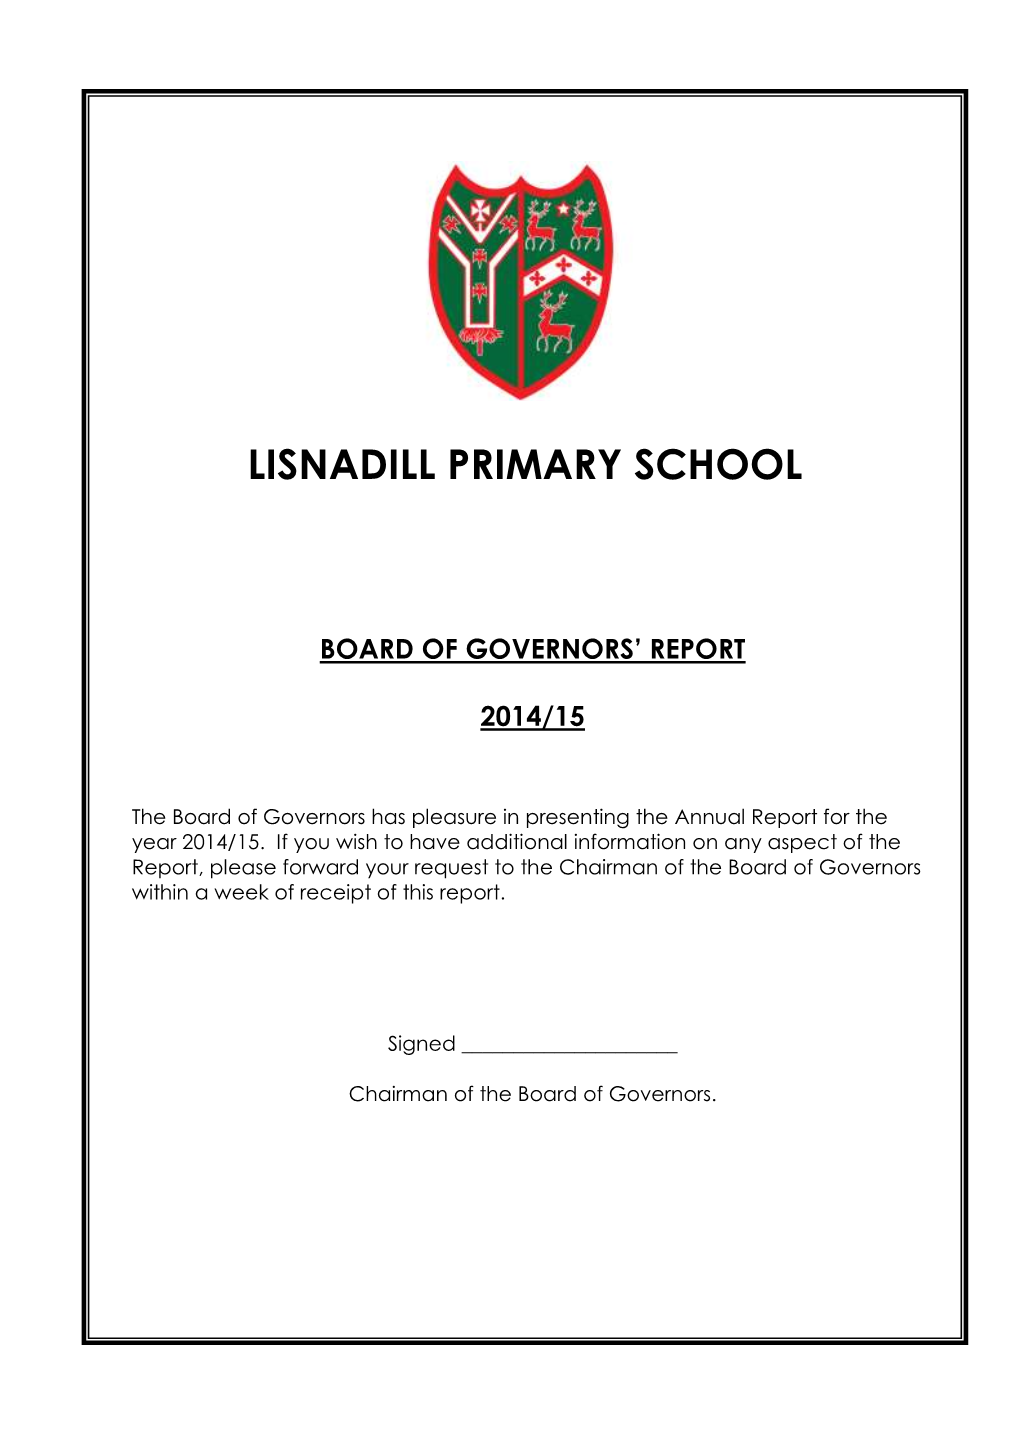 Board of Governors' Report 2014/15